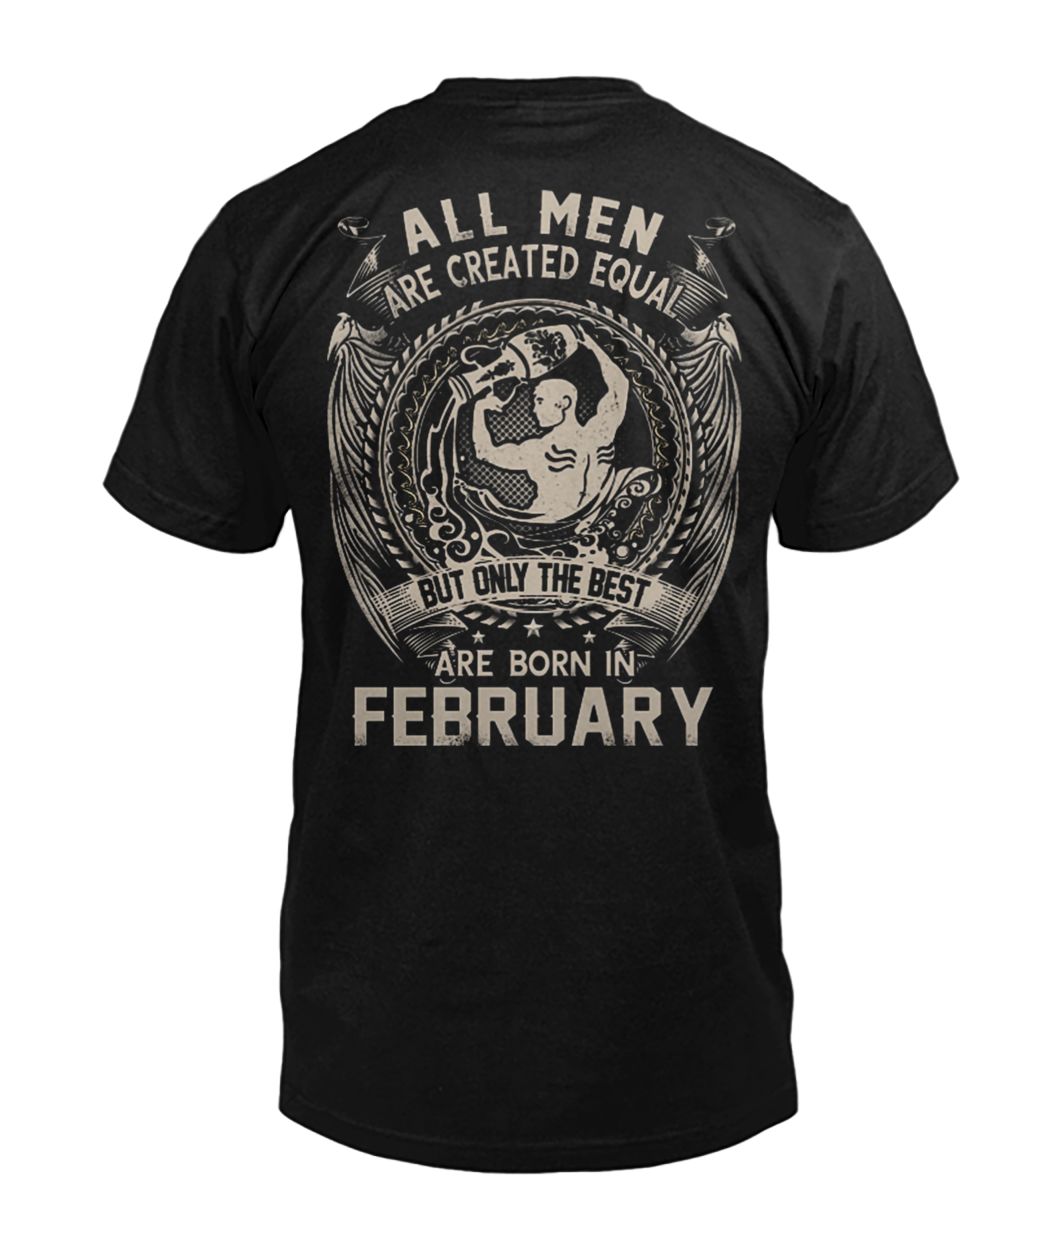 All men created equal but the best are born in february mens v-neck